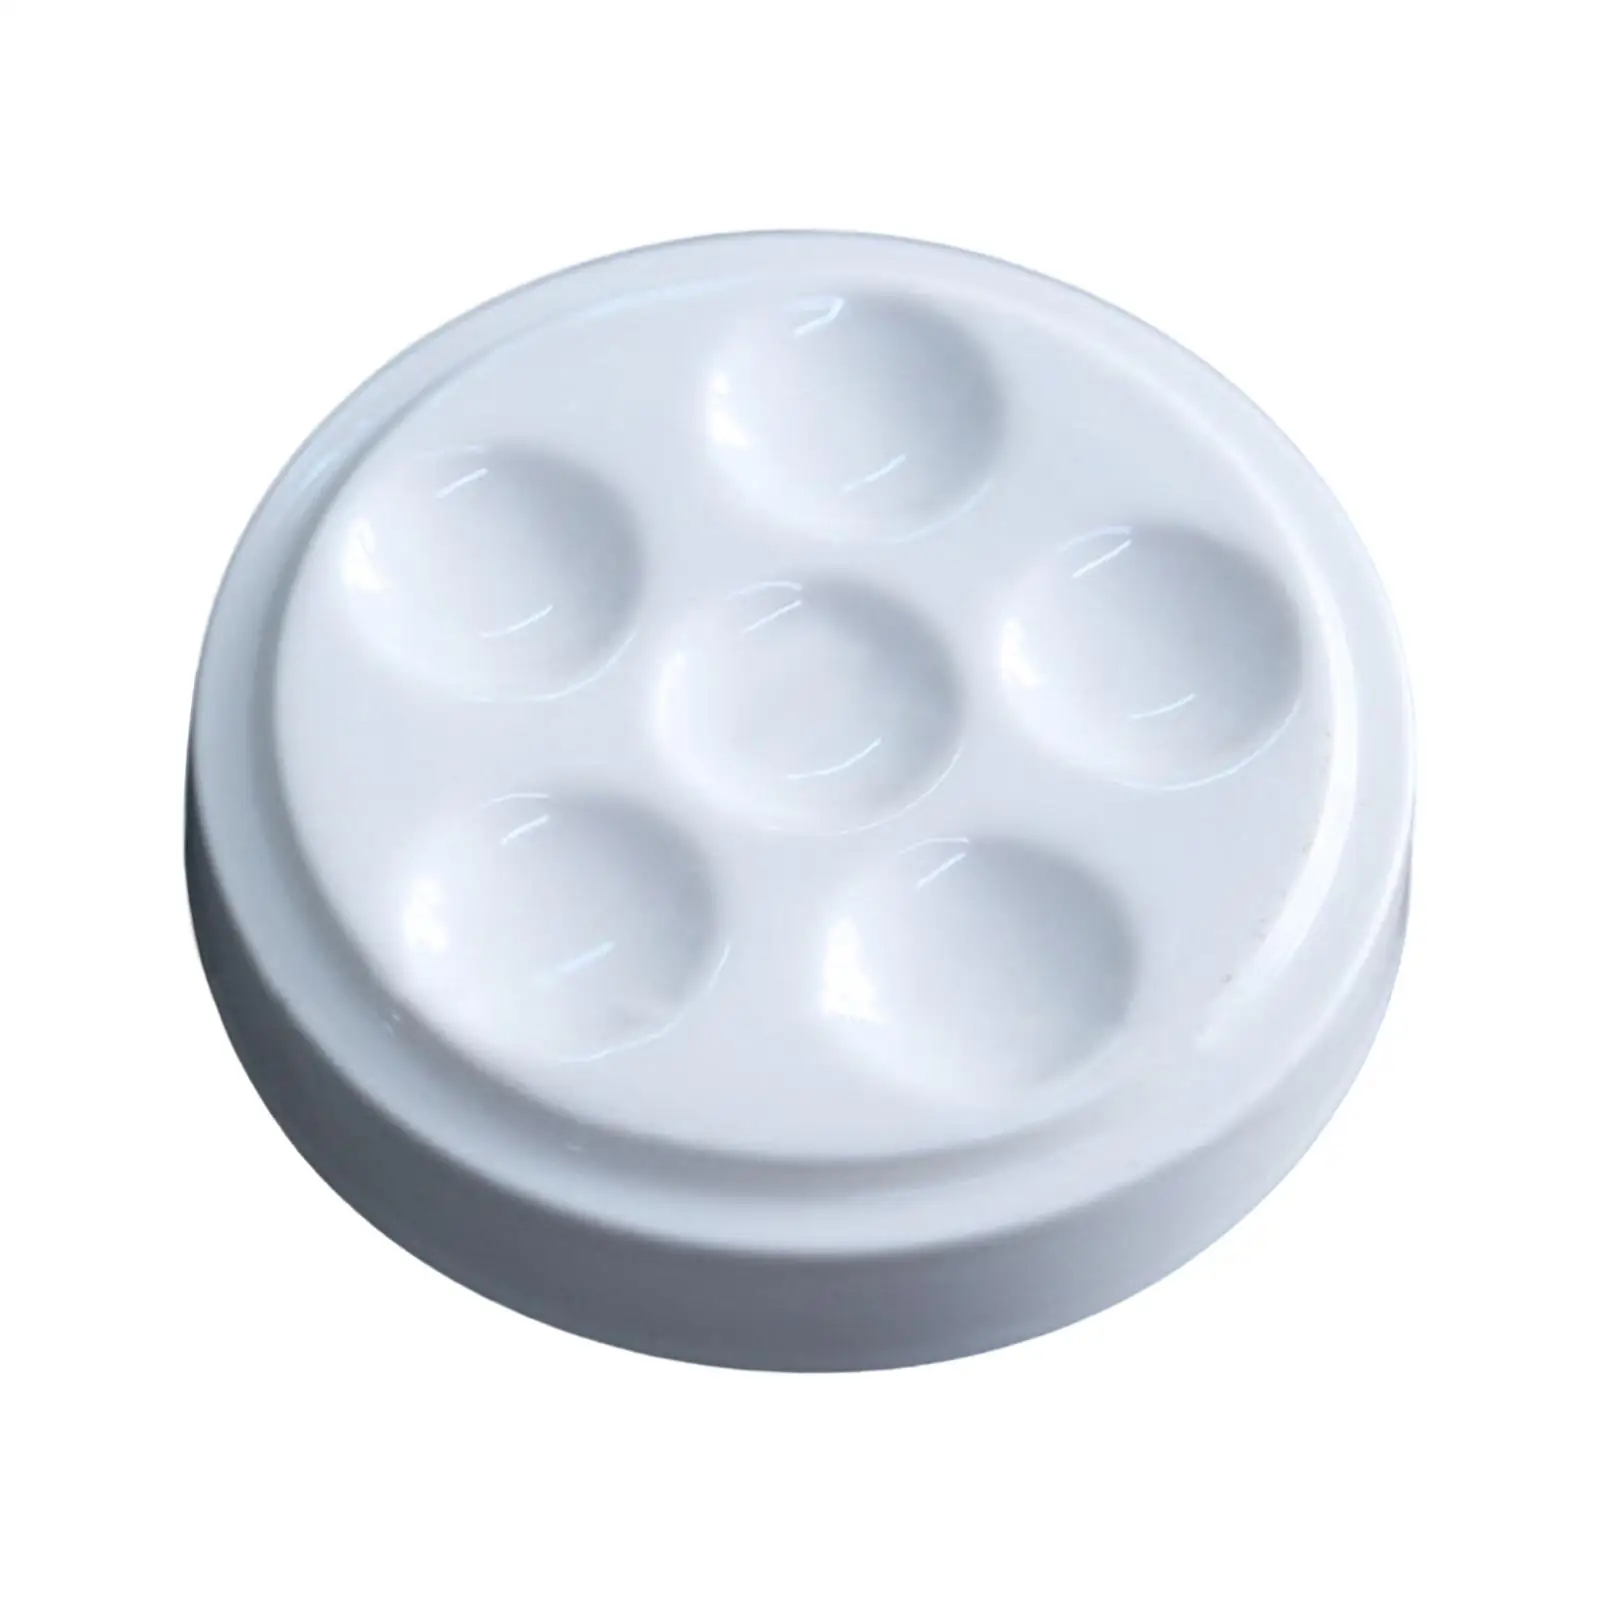 6 Grids Makeup Mixing Tray Nail Art Professional Nail Accessories Makeup Blending Ceramic Container for Paints